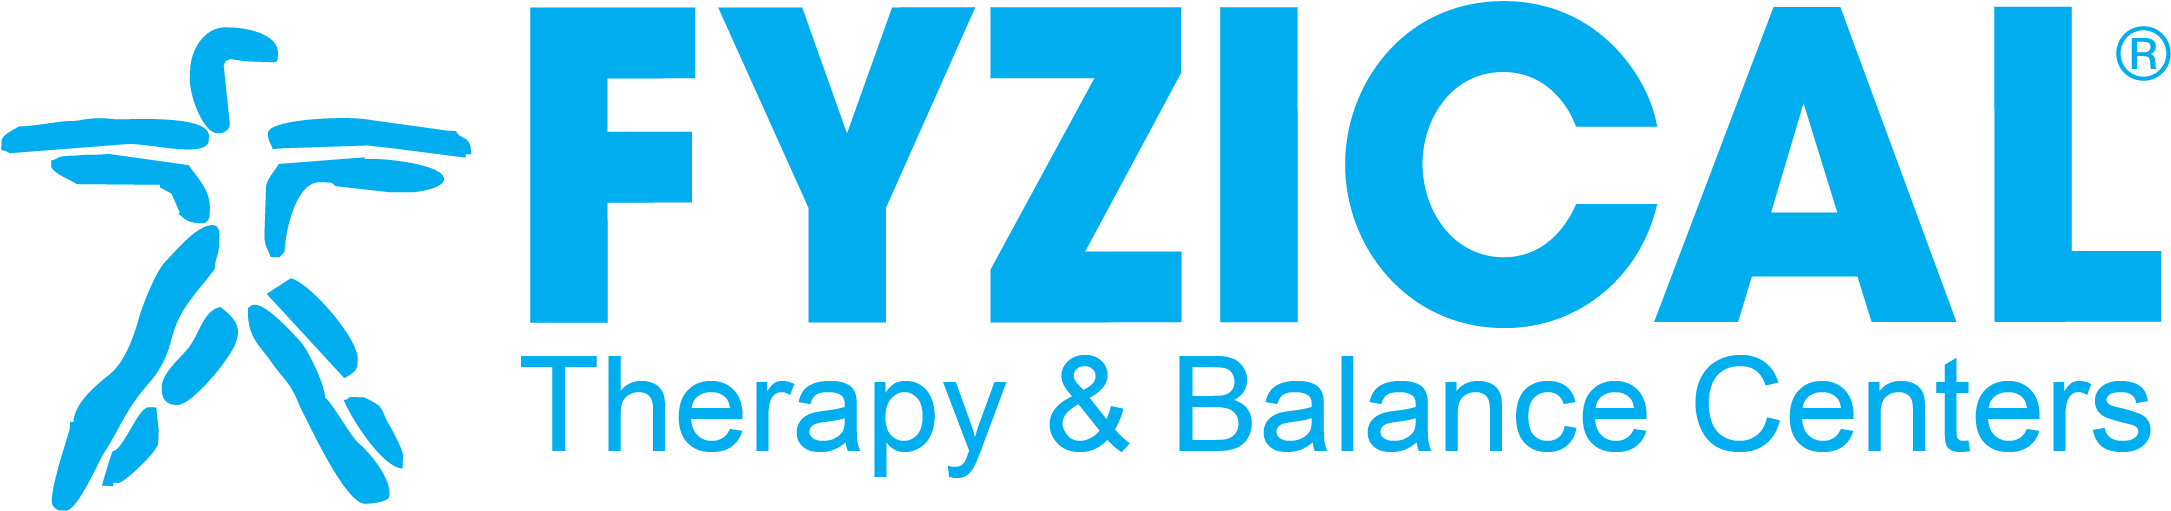 Fyzical Therapy & Balance Centers Of Las Vegas - Fyzical Therapy And Balance Center (1000x251), Png Download